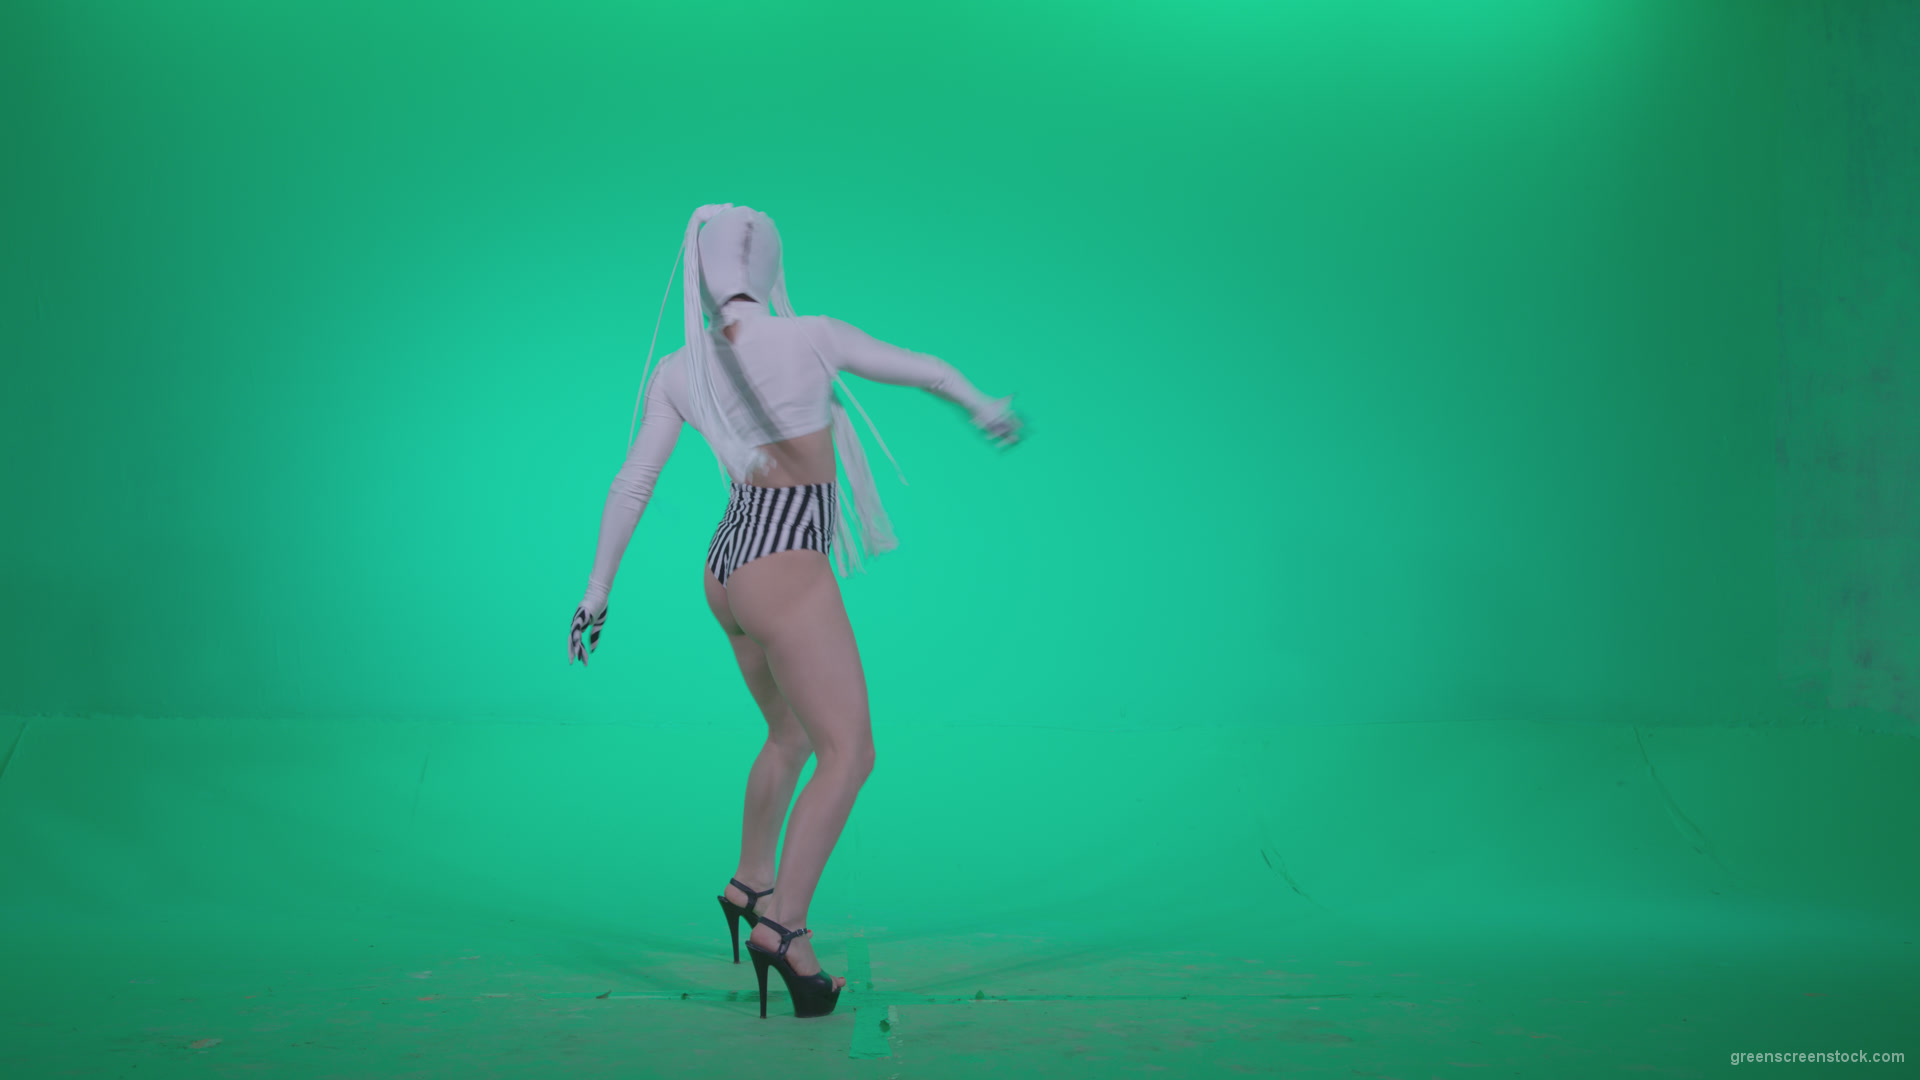 Go-go-Dancer-with-Latex-Top-t7-Green-Screen-Video-Footage_009 Green Screen Stock